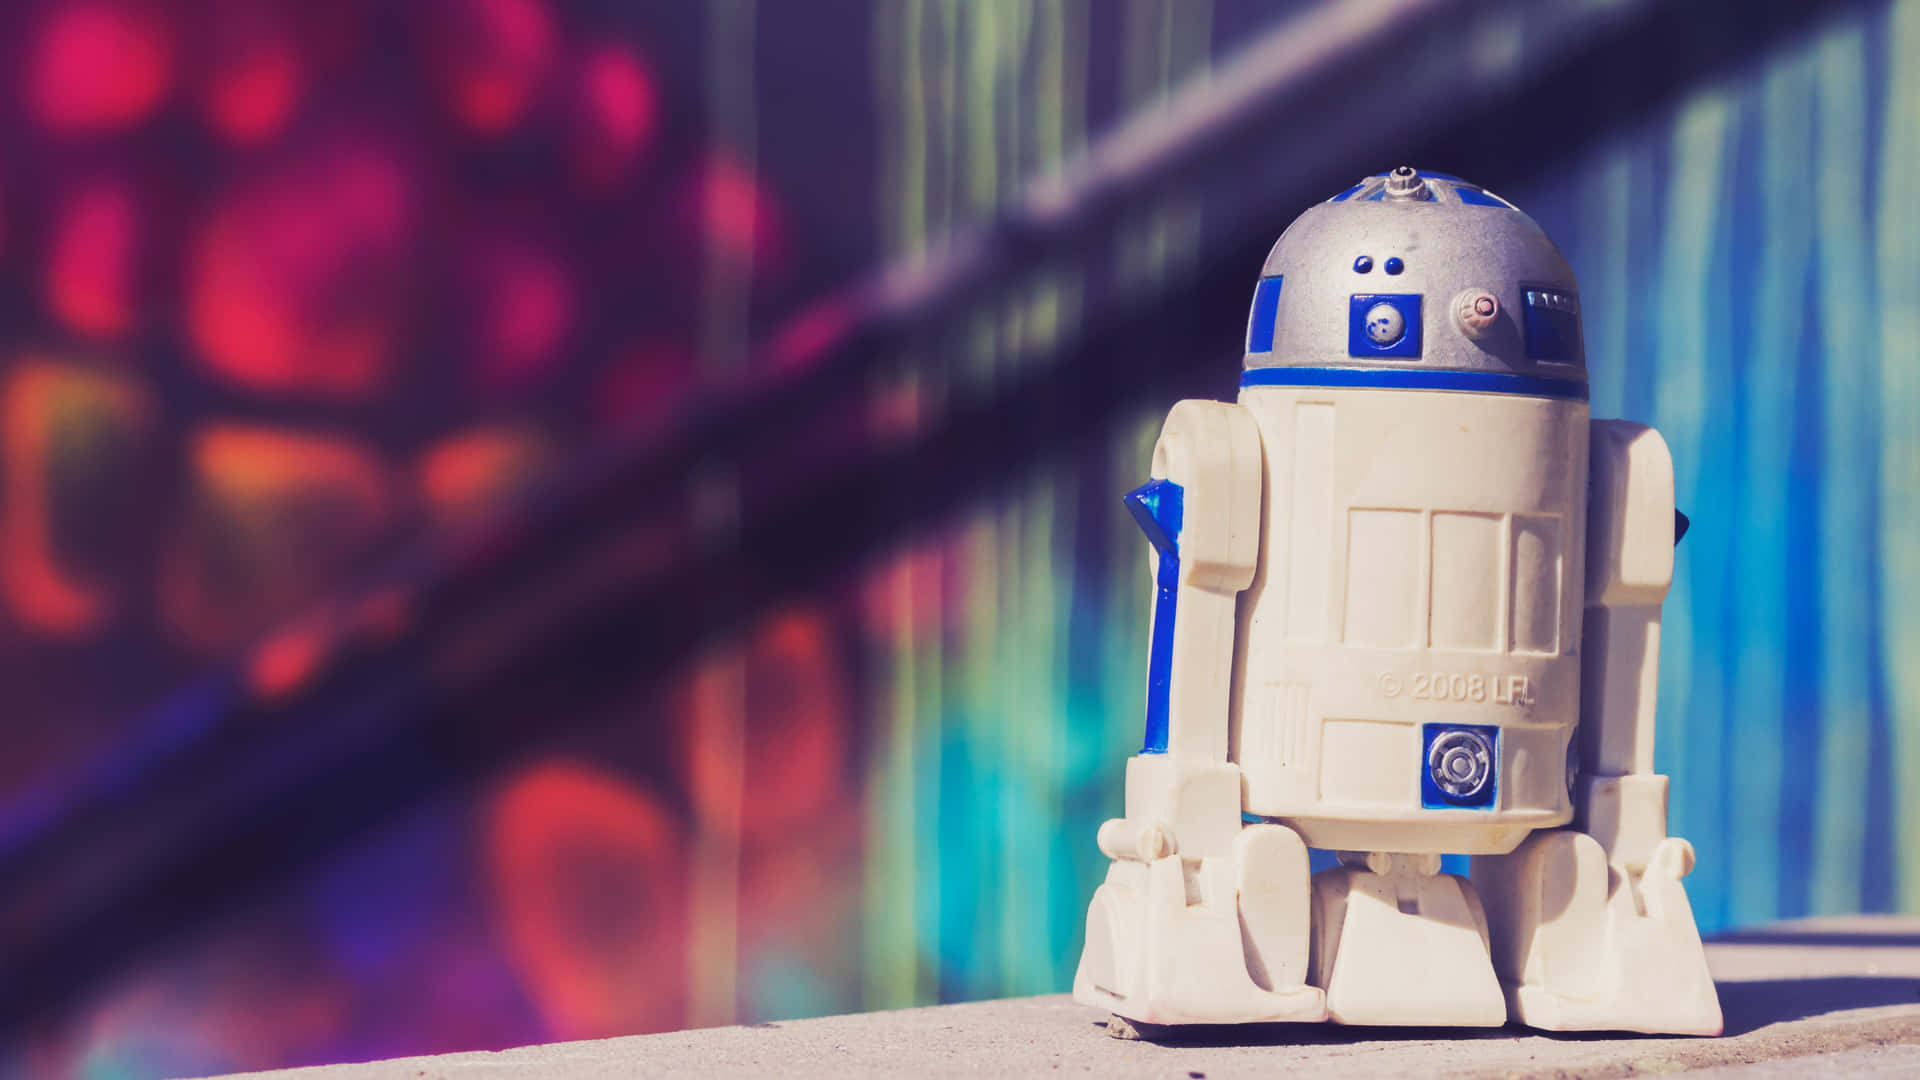 R2-d2, The Lovable Droid From Star Wars